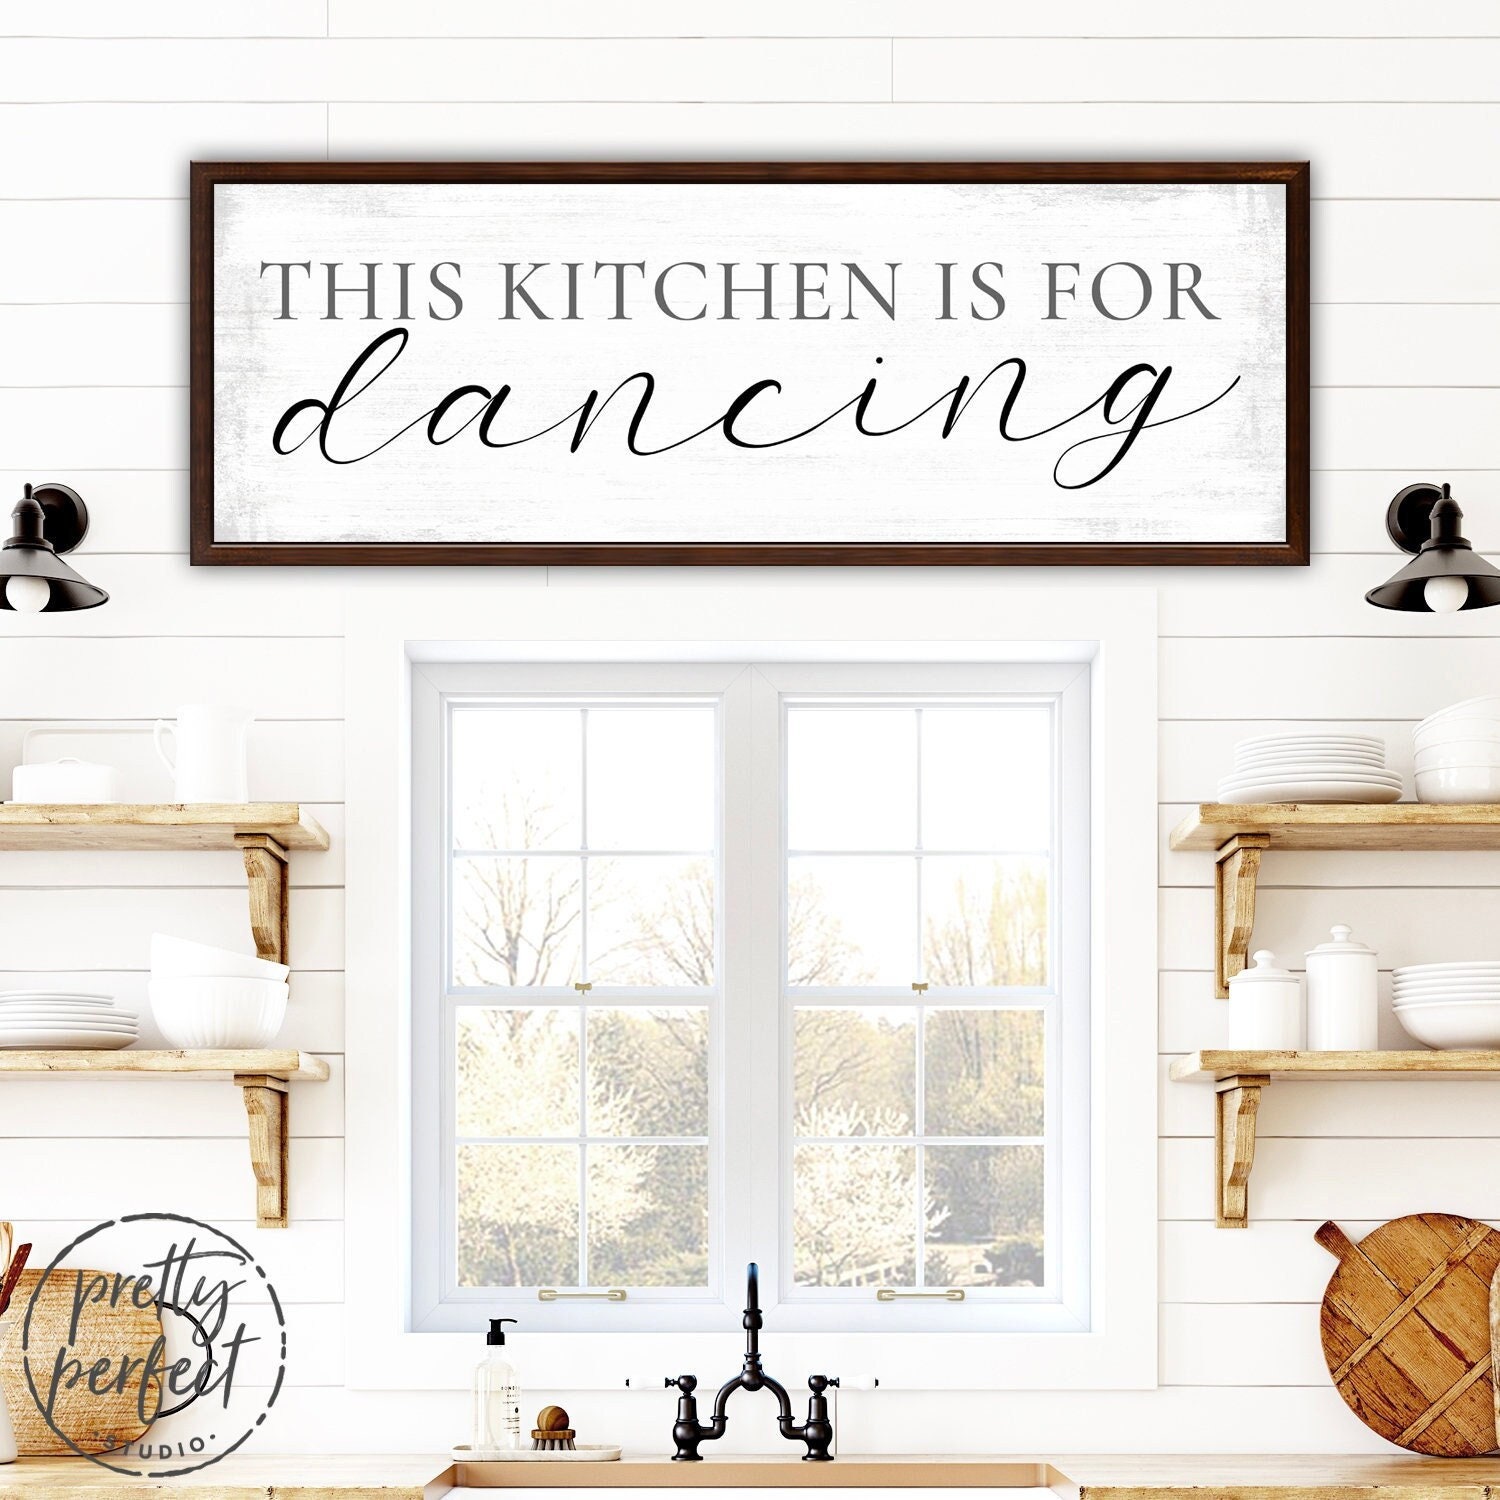 JennyGems Funny Kitchen Signs, This Kitchen is for Dancing